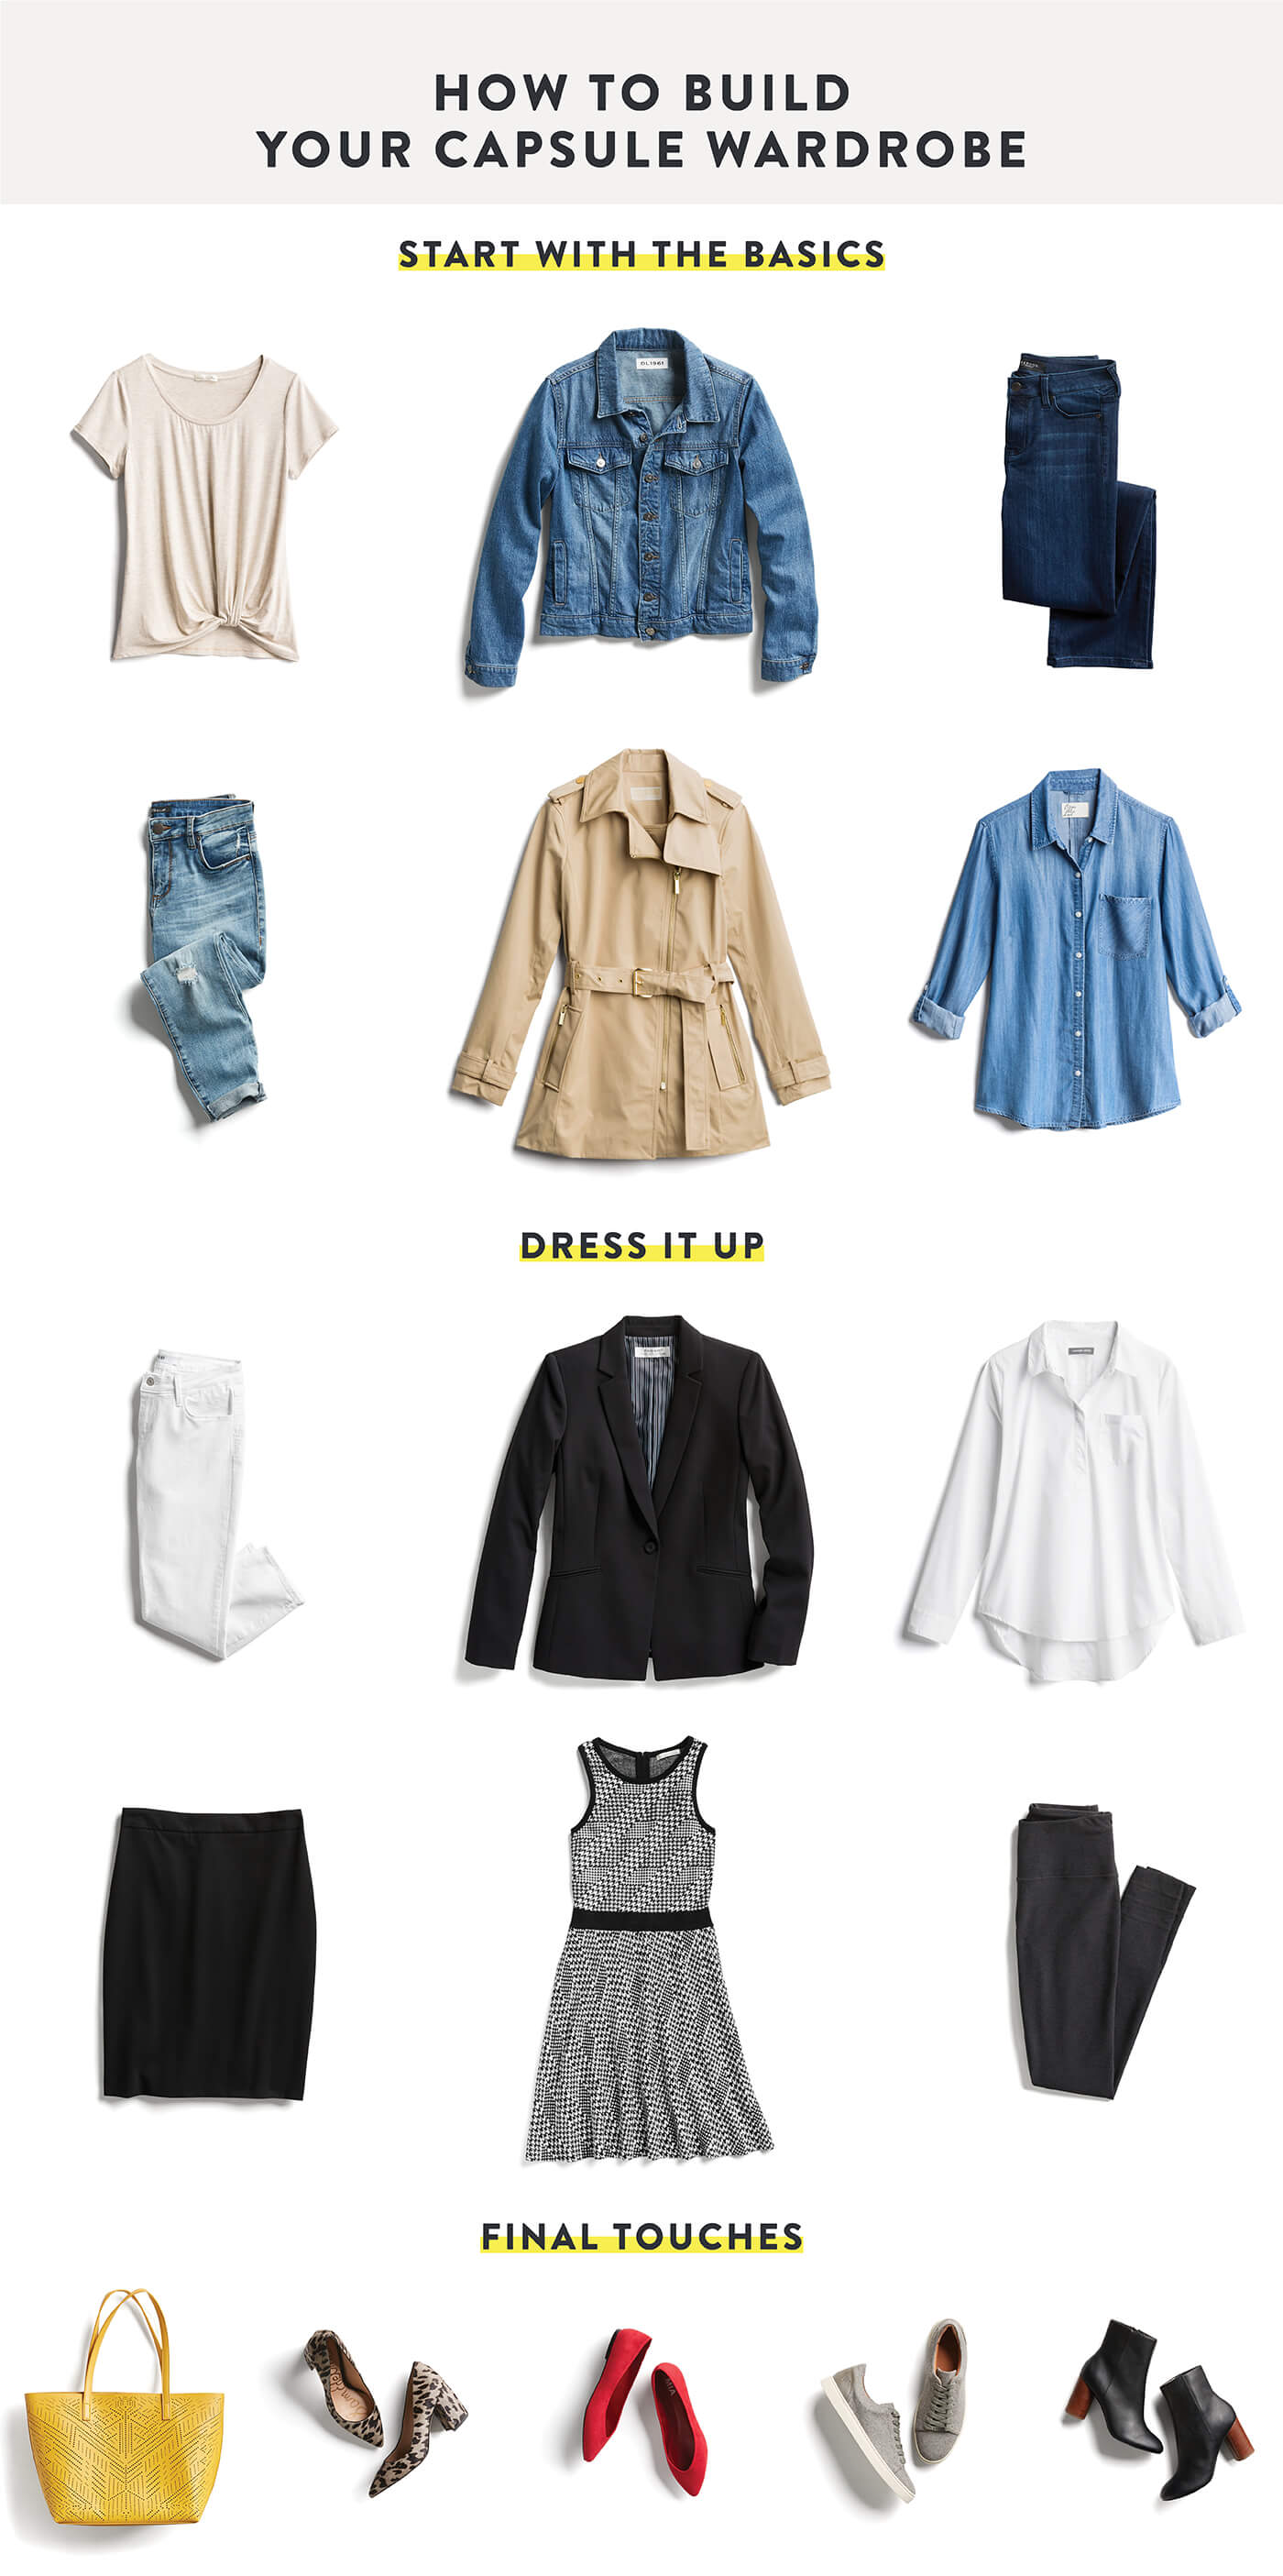 How to Build a Rock Chic Summer Capsule Wardrobe  Summer capsule wardrobe,  Chic capsule wardrobe, Capsule wardrobe